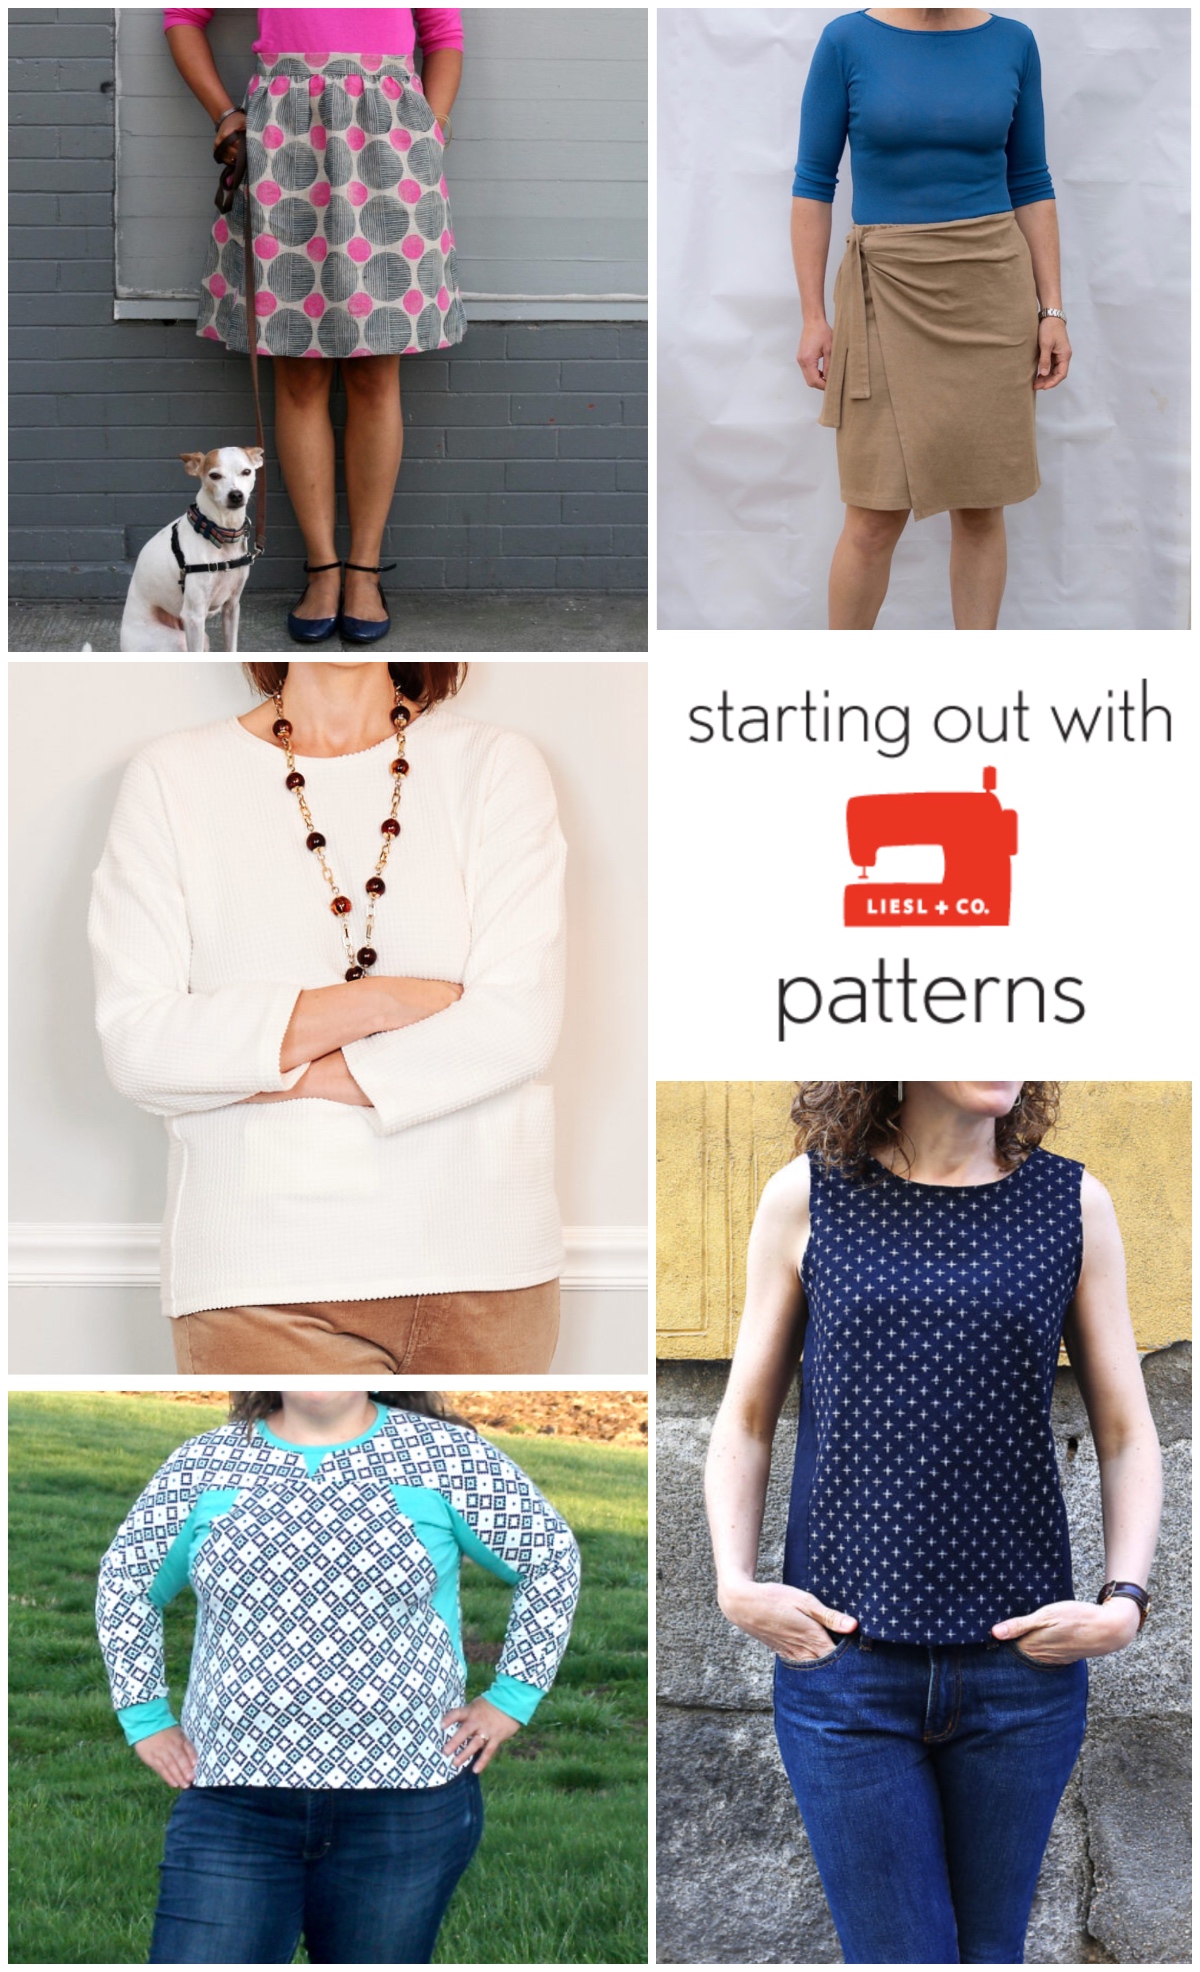 14 Women's Sewing Patterns That Are Great for Beginners | Blog | Oliver + S